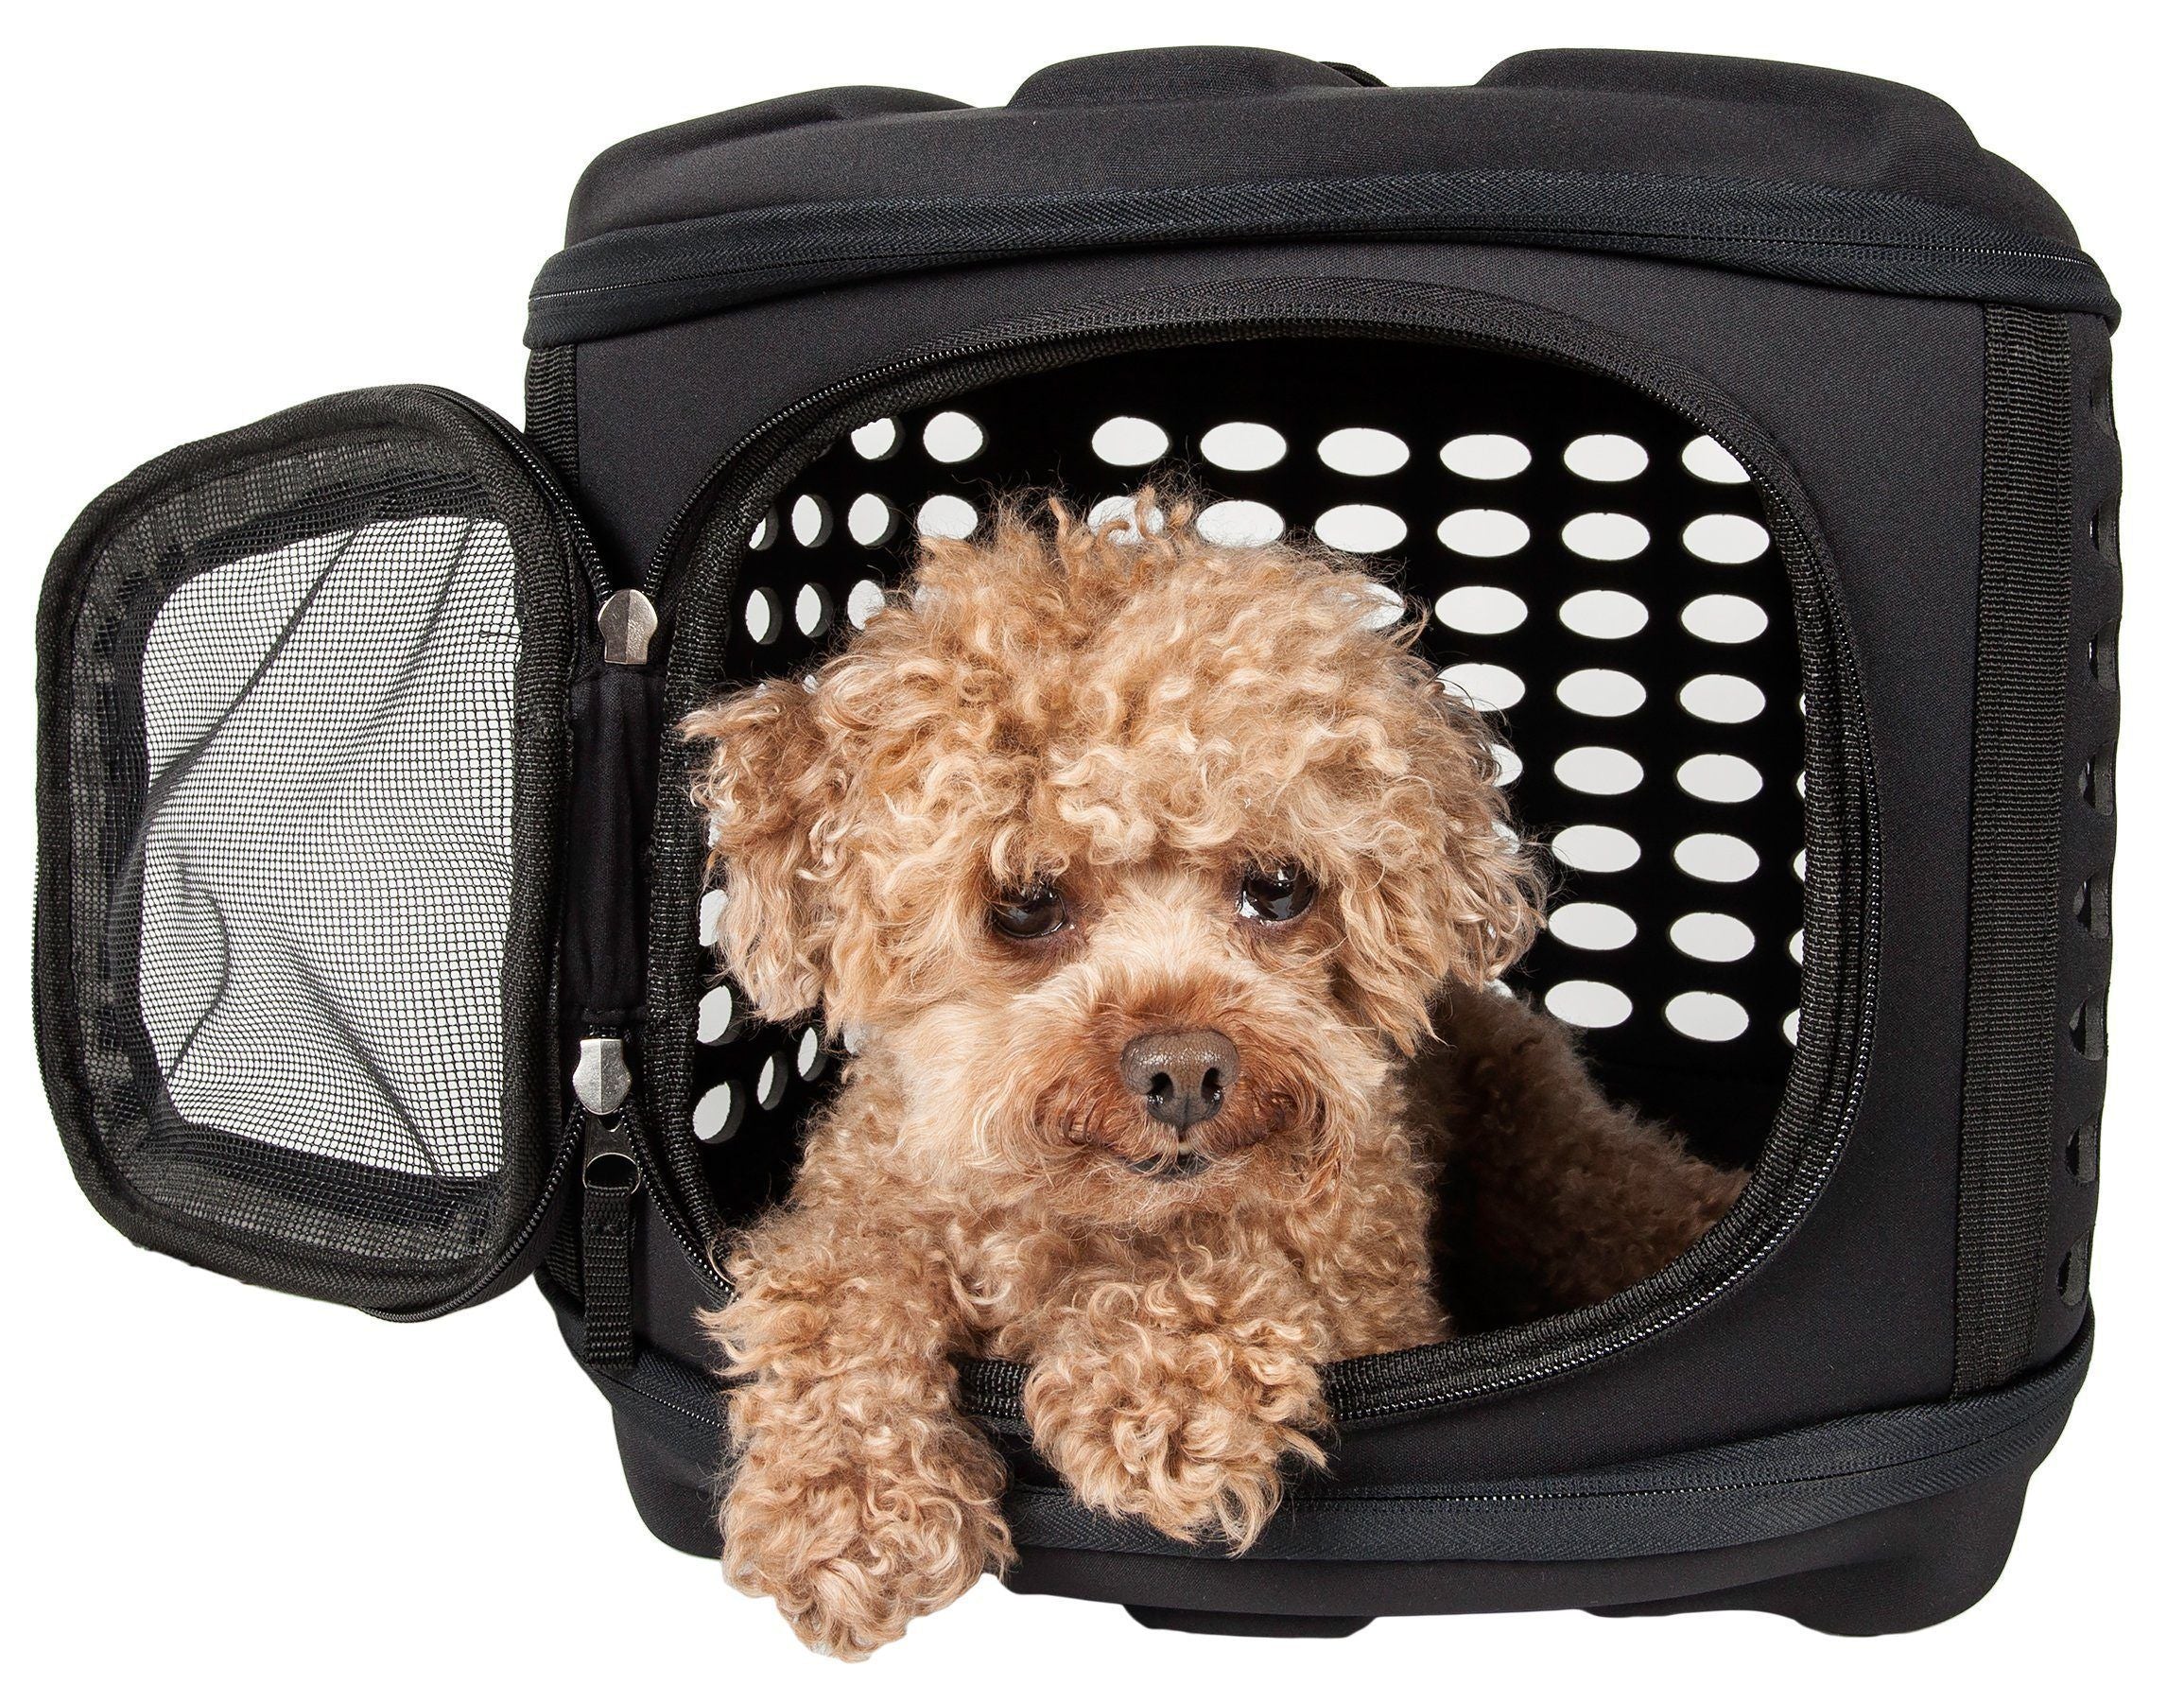 Pet Life ® 'Circular Shelled' Perforated Lightweight Collapsible Military Grade Travel Pet Dog Carrier Charcoal Black 